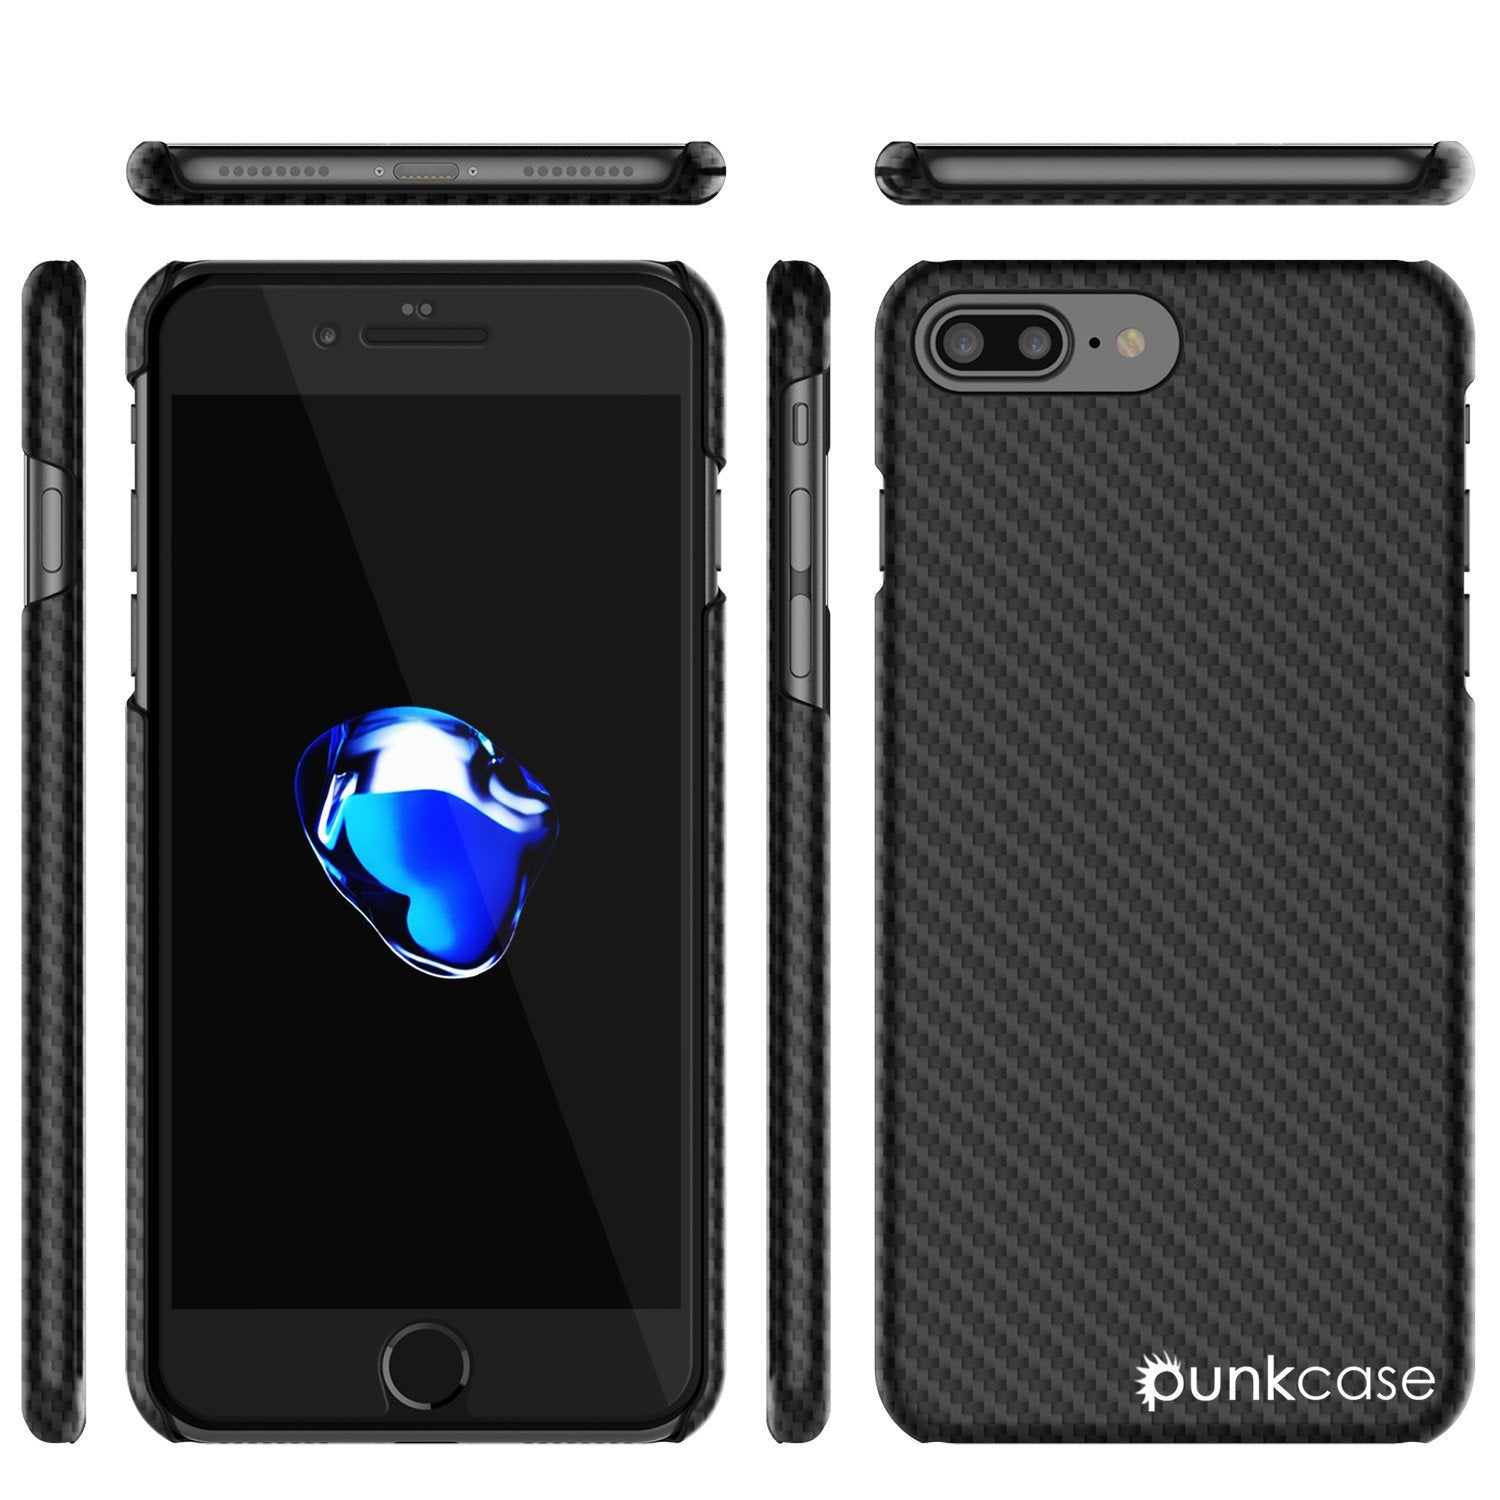 iPhone 7+ Plus Case Punkcase Carbonshield Shockproof Ultrathin Case Cover